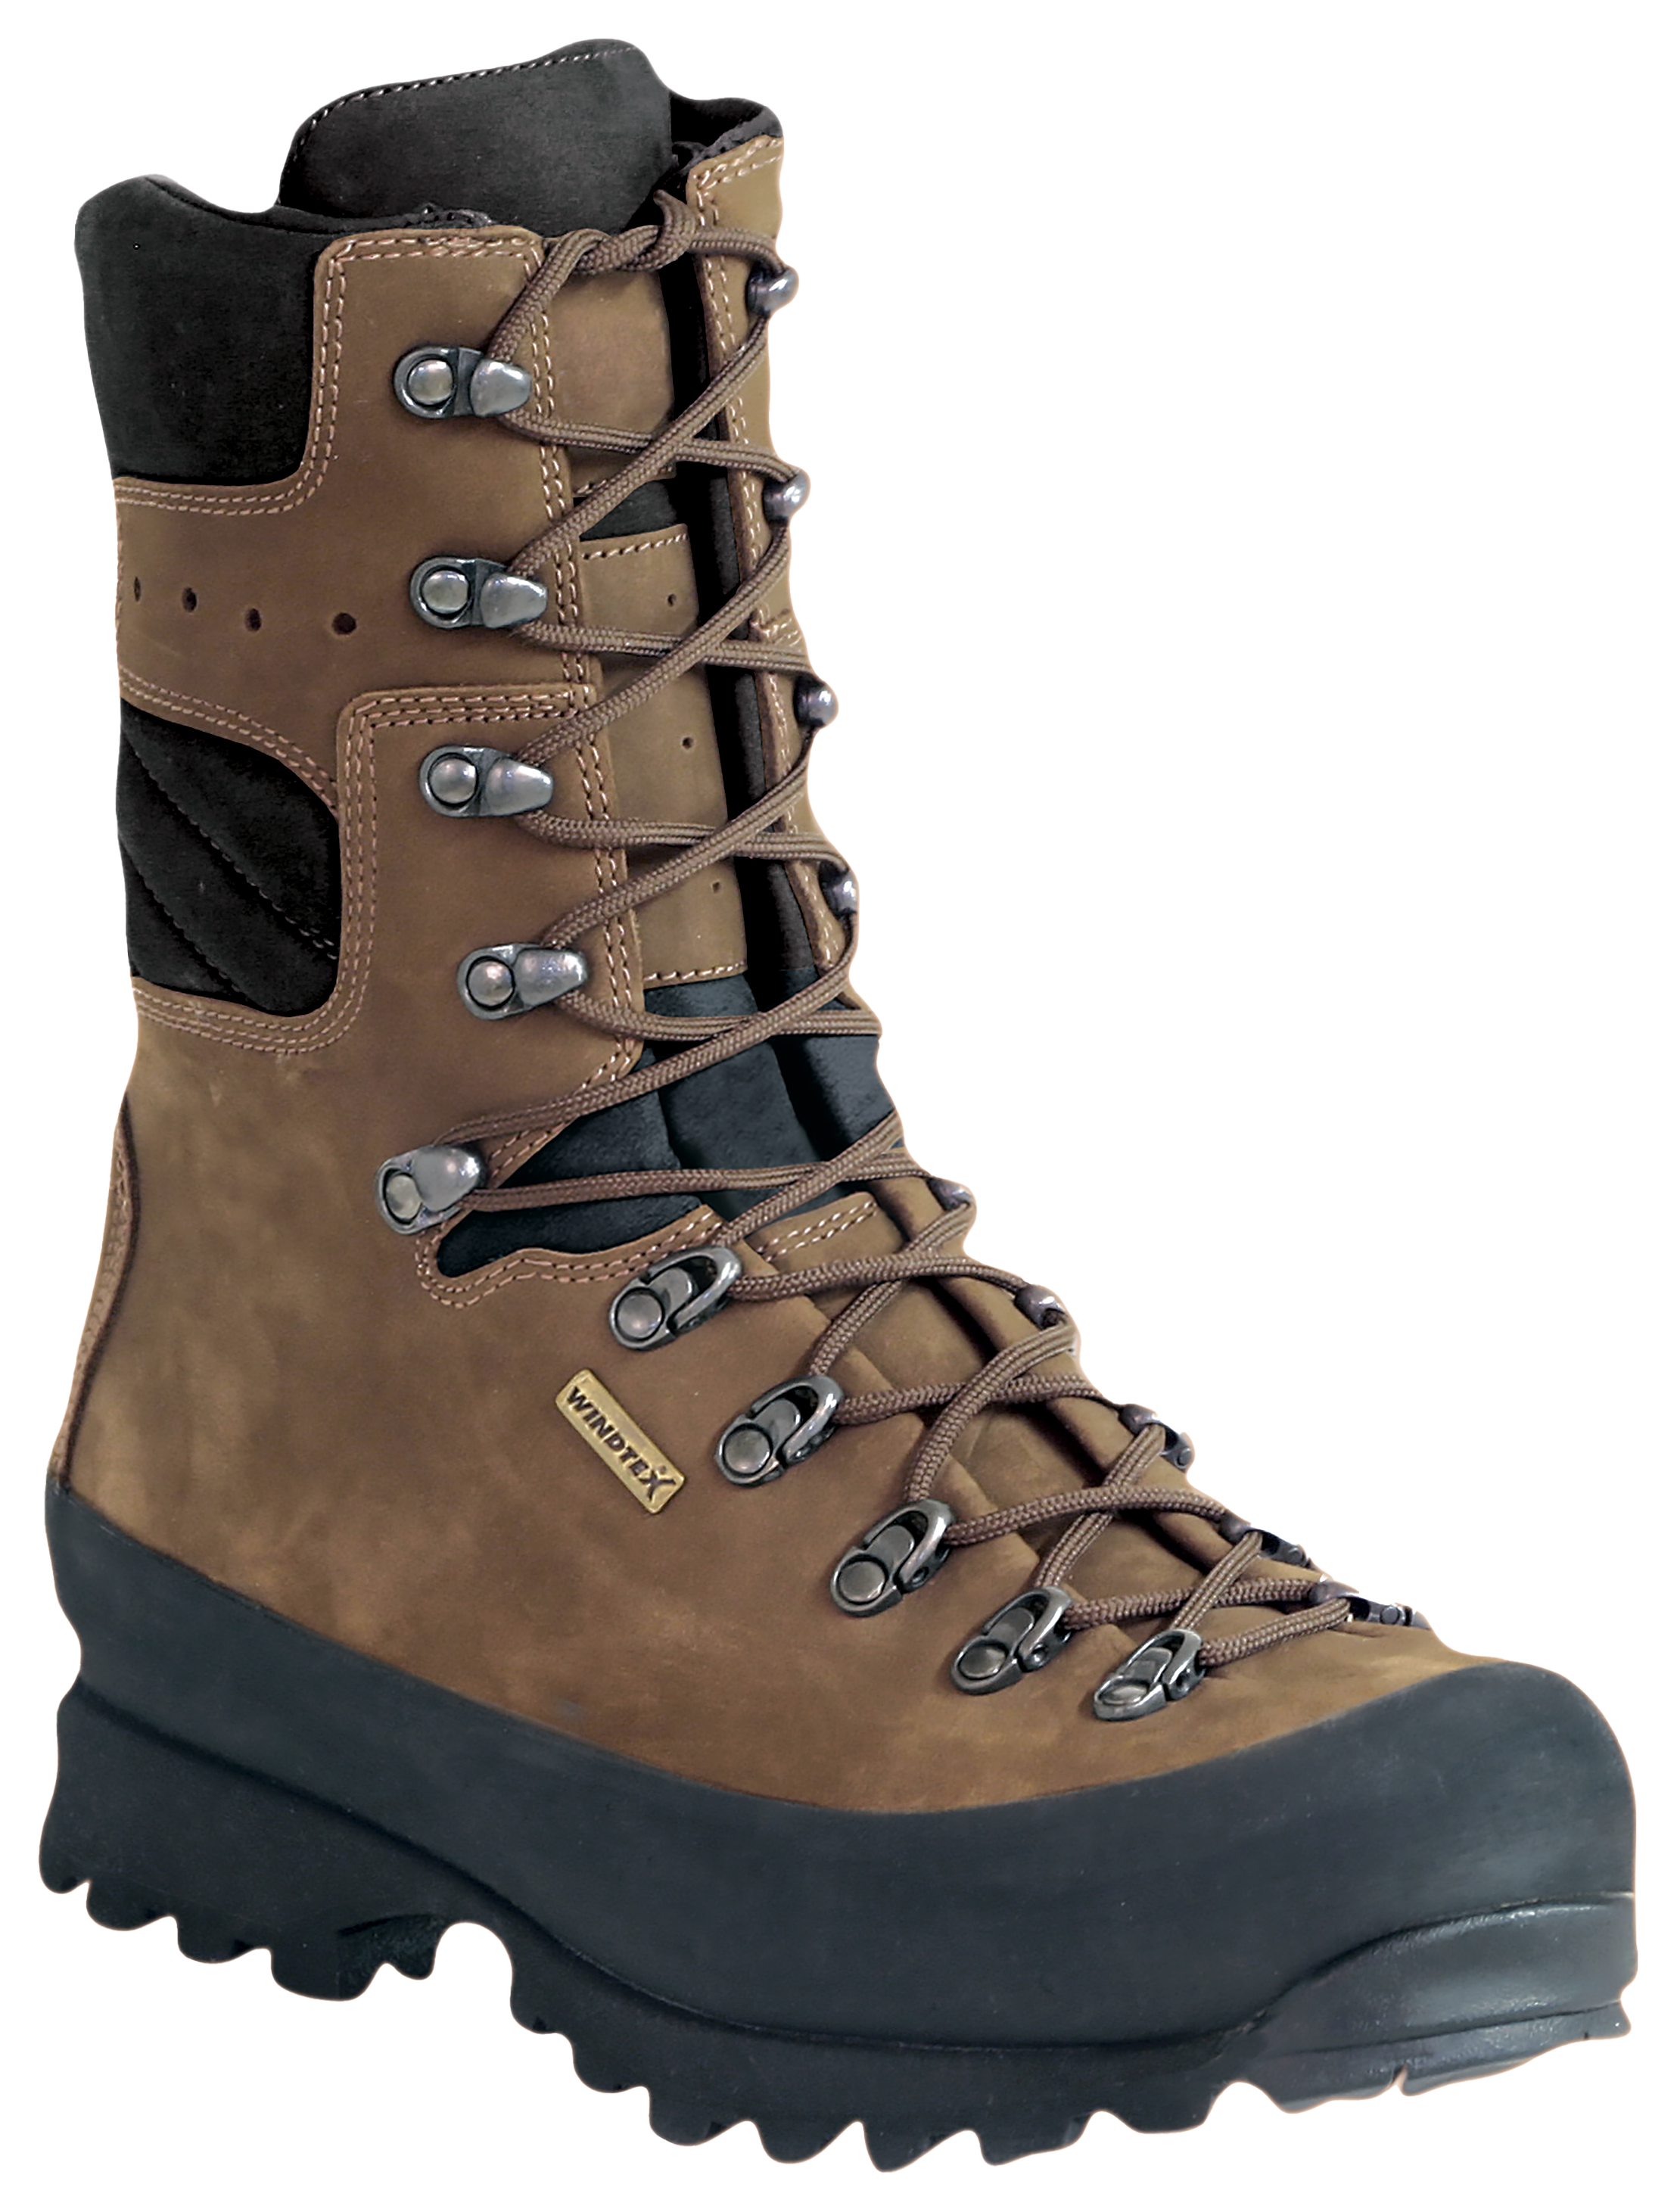 Kenetrek Mountain Extreme 1000 Insulated Waterproof Hunting Boots for Men - Brown - 10.5M